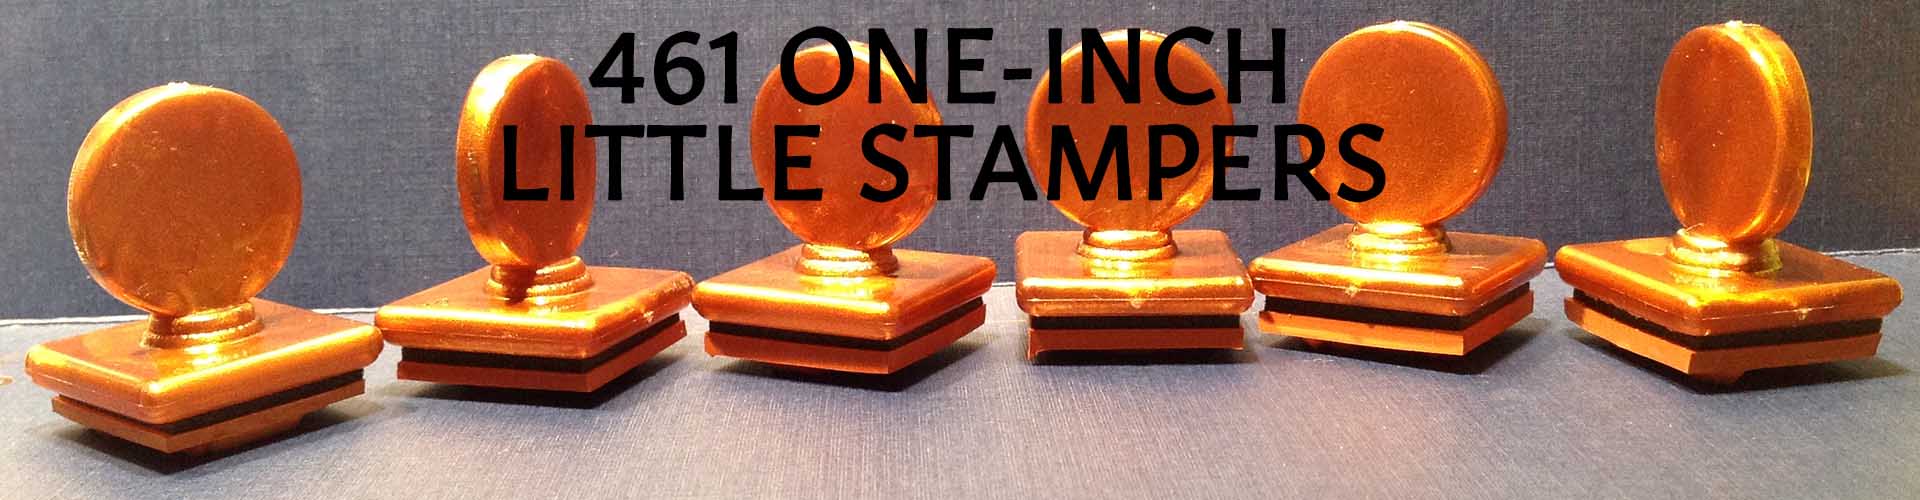 Little Stampers